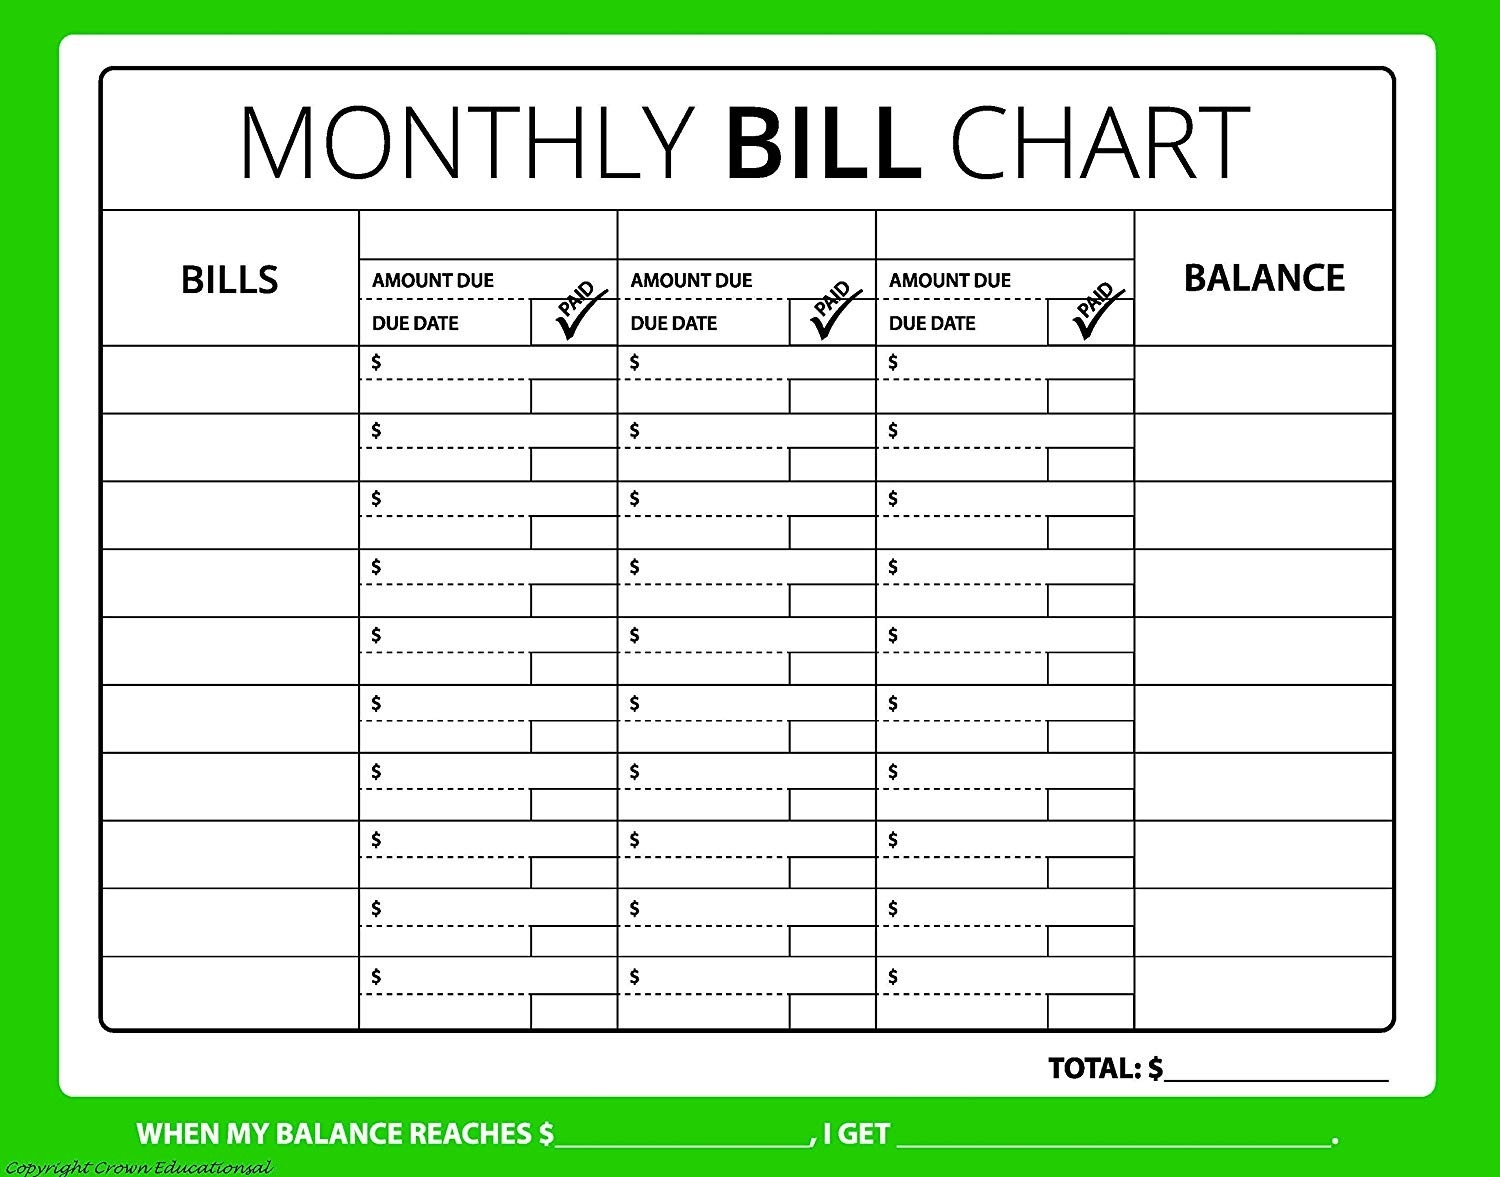 38 Factual Monthly Bill Due Date Chart-Printable Monthly Bill Chart